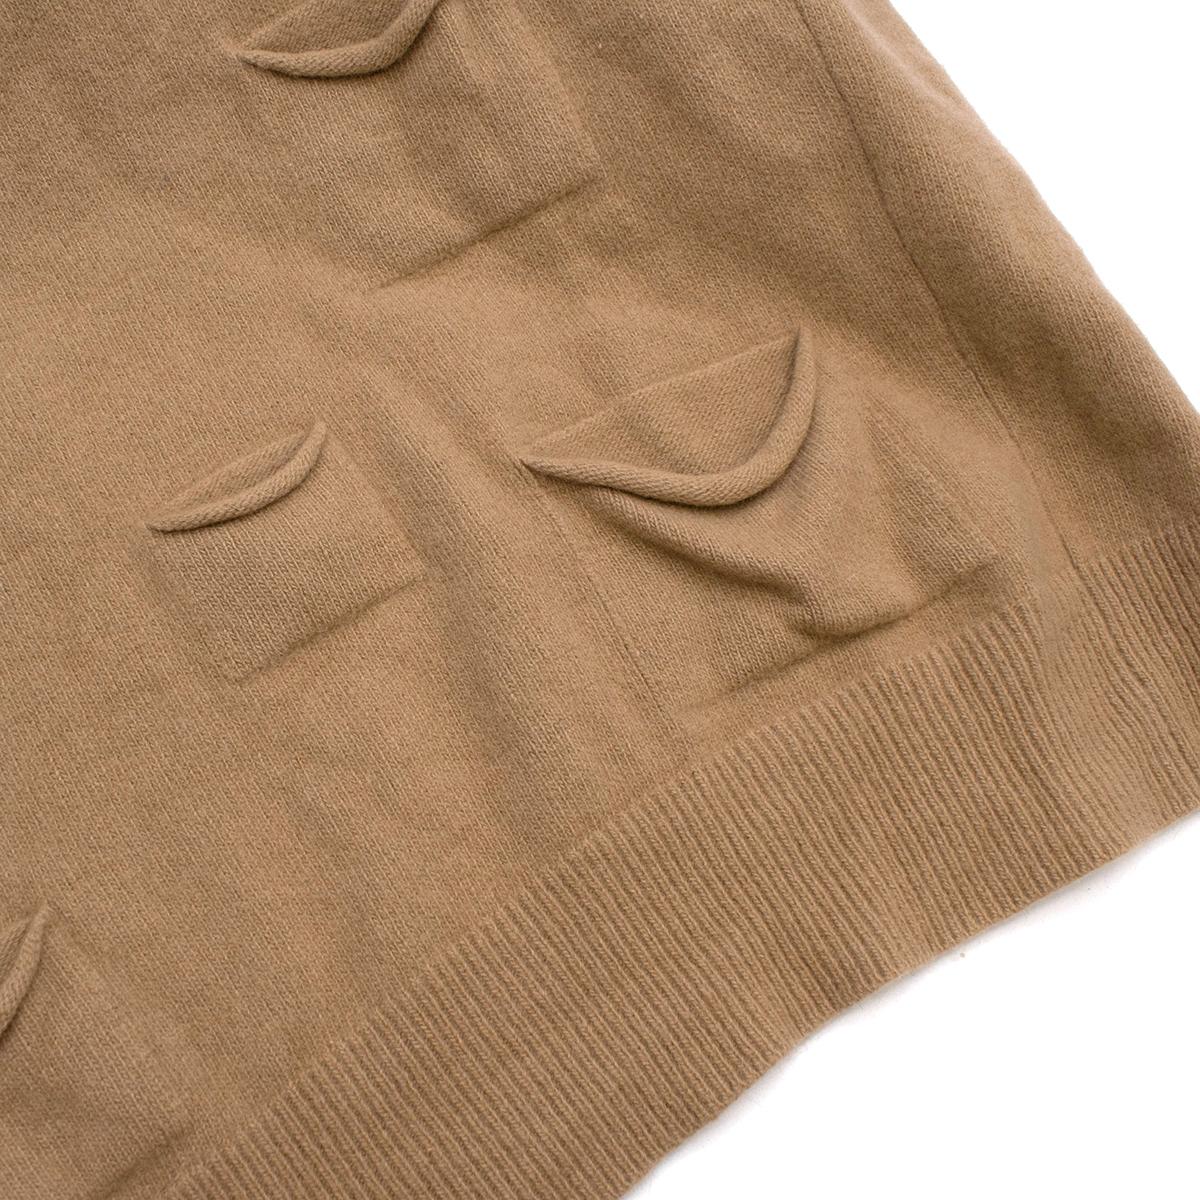 J.W. Anderson Camel Wool & Cashmere Pocket Details Knit Dress - Size S In Excellent Condition For Sale In London, GB